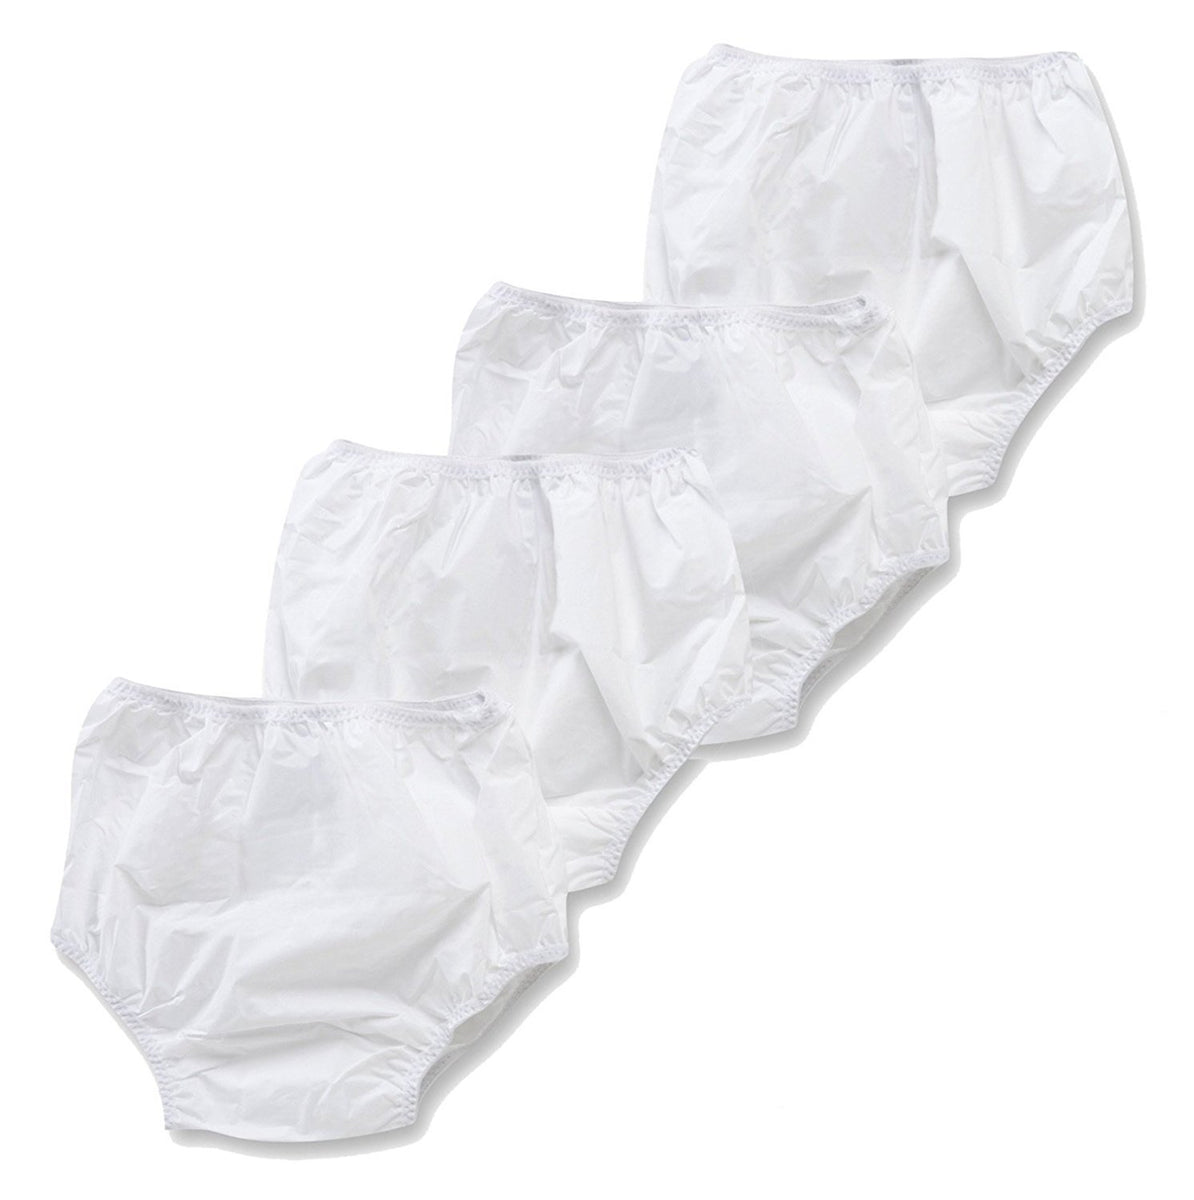 Baby NEW Gerber Plastic Pants 4 Pairs 2T 3T FREE SHIPPING Diaper Covers ...